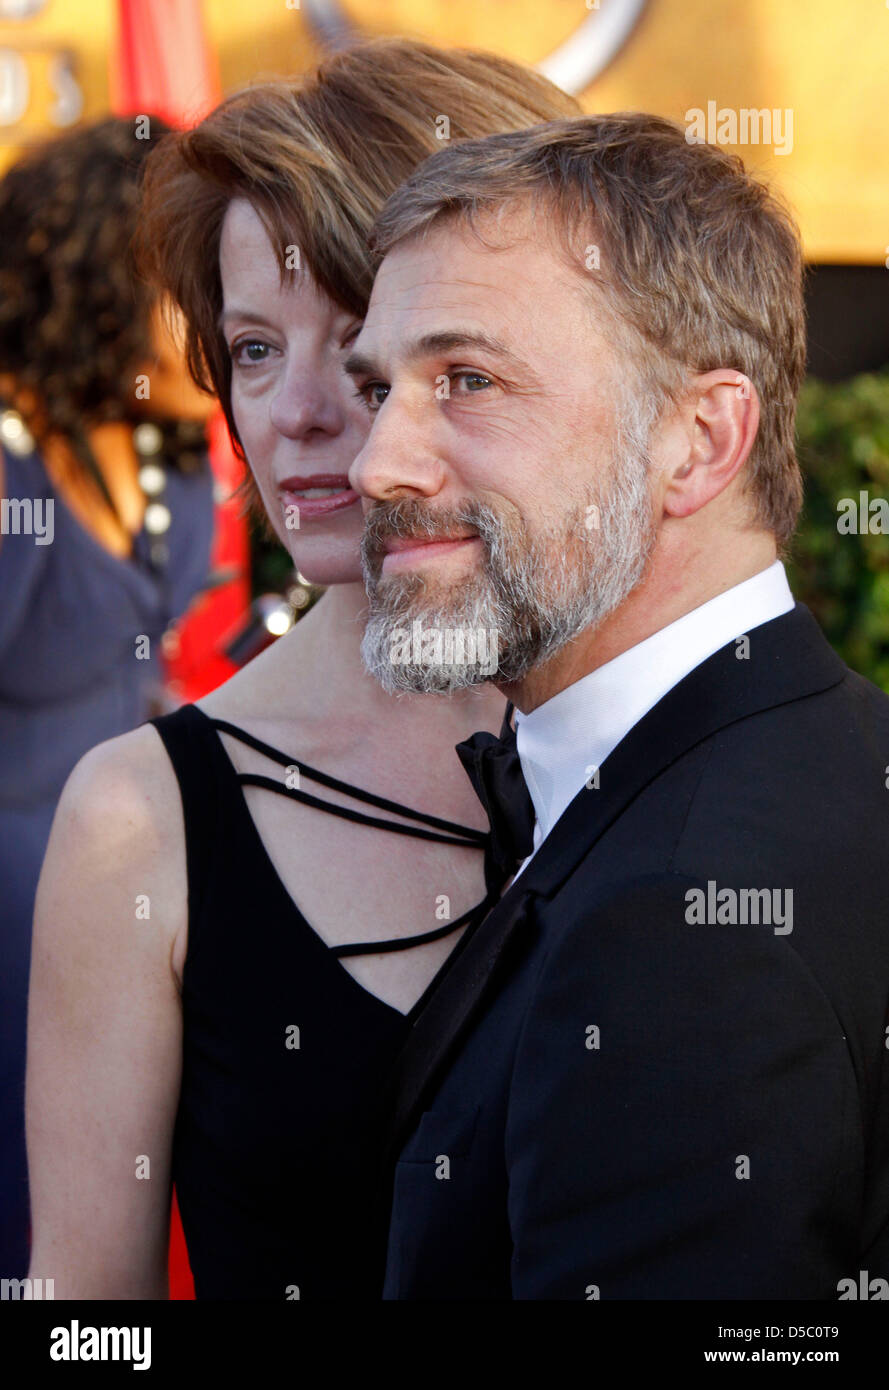 Austrian actor Christoph Waltz (R) and his partner Judith Holste (L) attend the 16th Annual Screen Actor&#39;s Guild (SAG) Awards at the Shrine Auditorium in ... - austrian-actor-christoph-waltz-r-and-his-partner-judith-holste-l-attend-D5C0T9